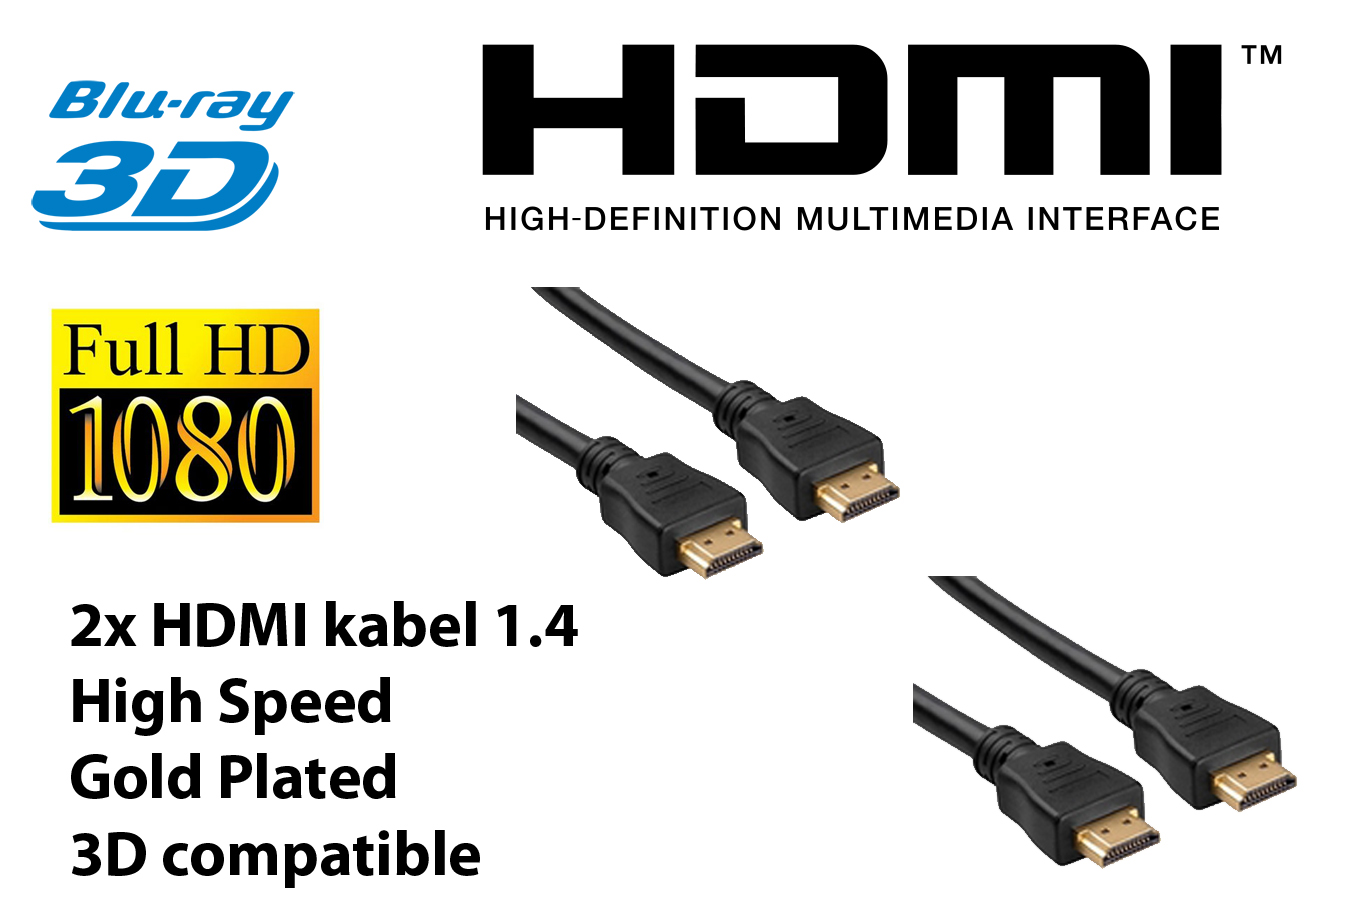 Today's Best Deal - 2x Gold plated HDMI 1.4